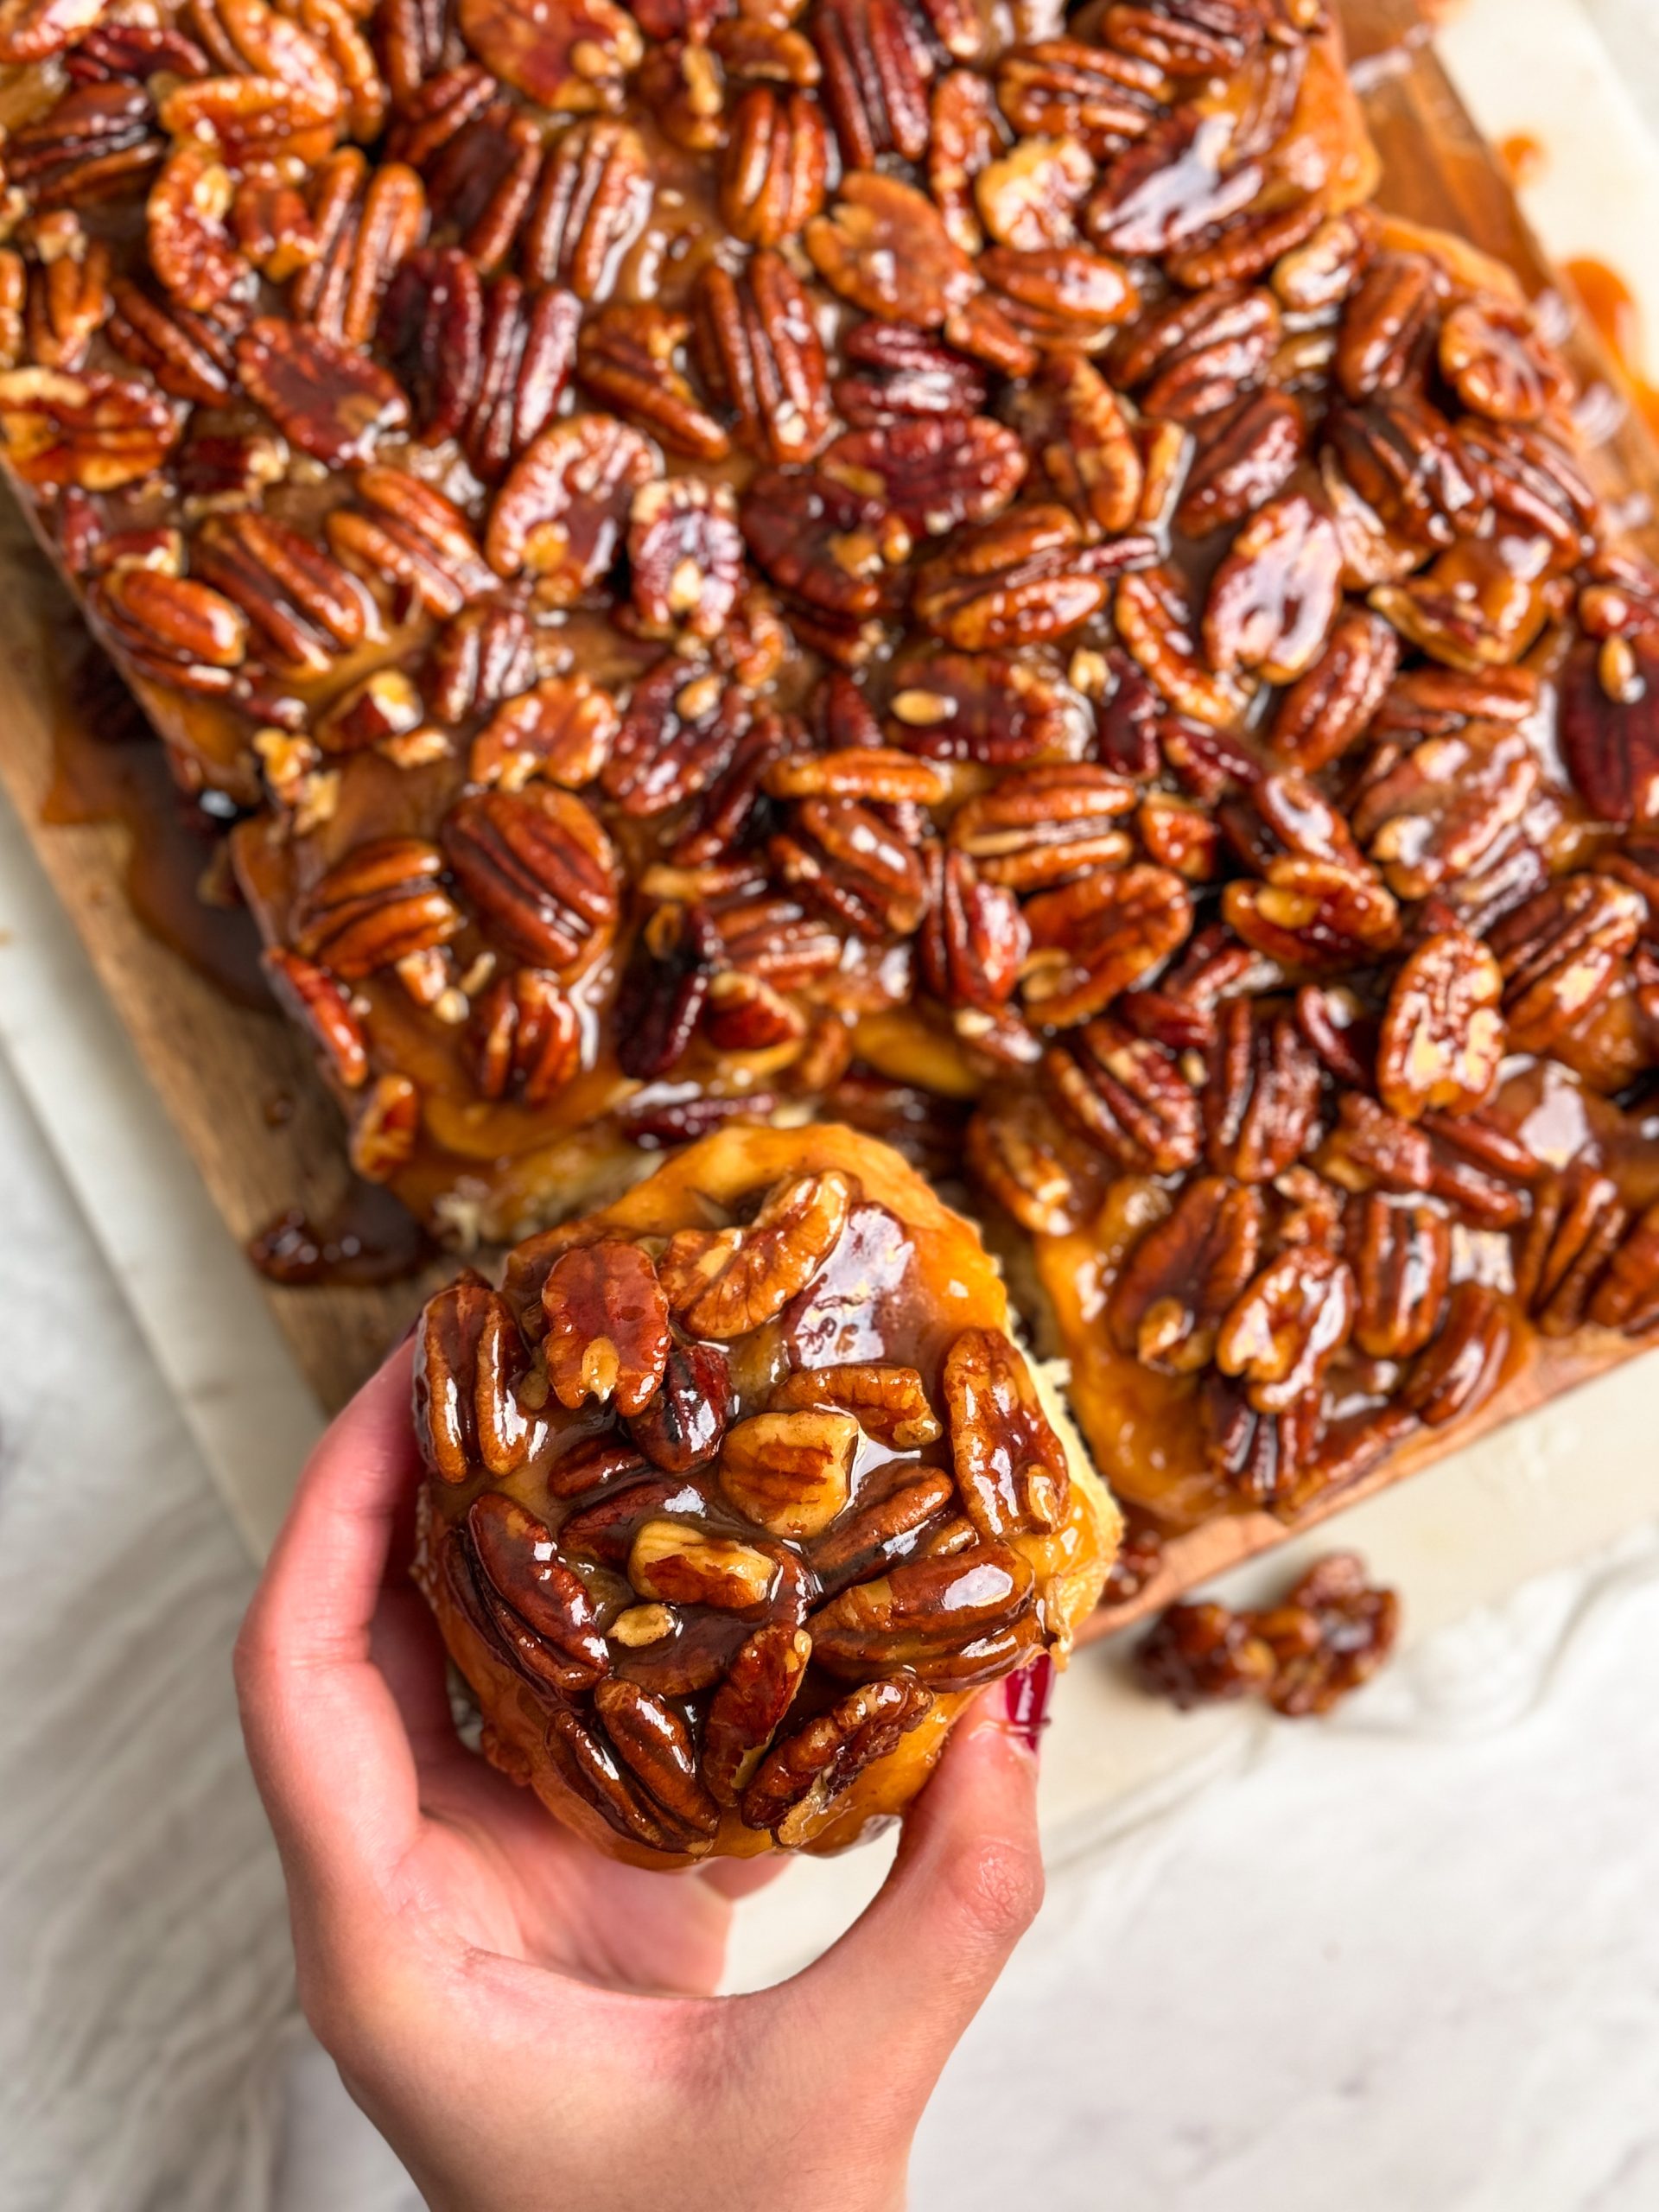 12 sticky pecan cinnamon buns with a caramel pecan topping on a wooden cutting board. they look soft and fluffy with a beautiful golden nutty topping. a hand is pulling out one bun which is in focus